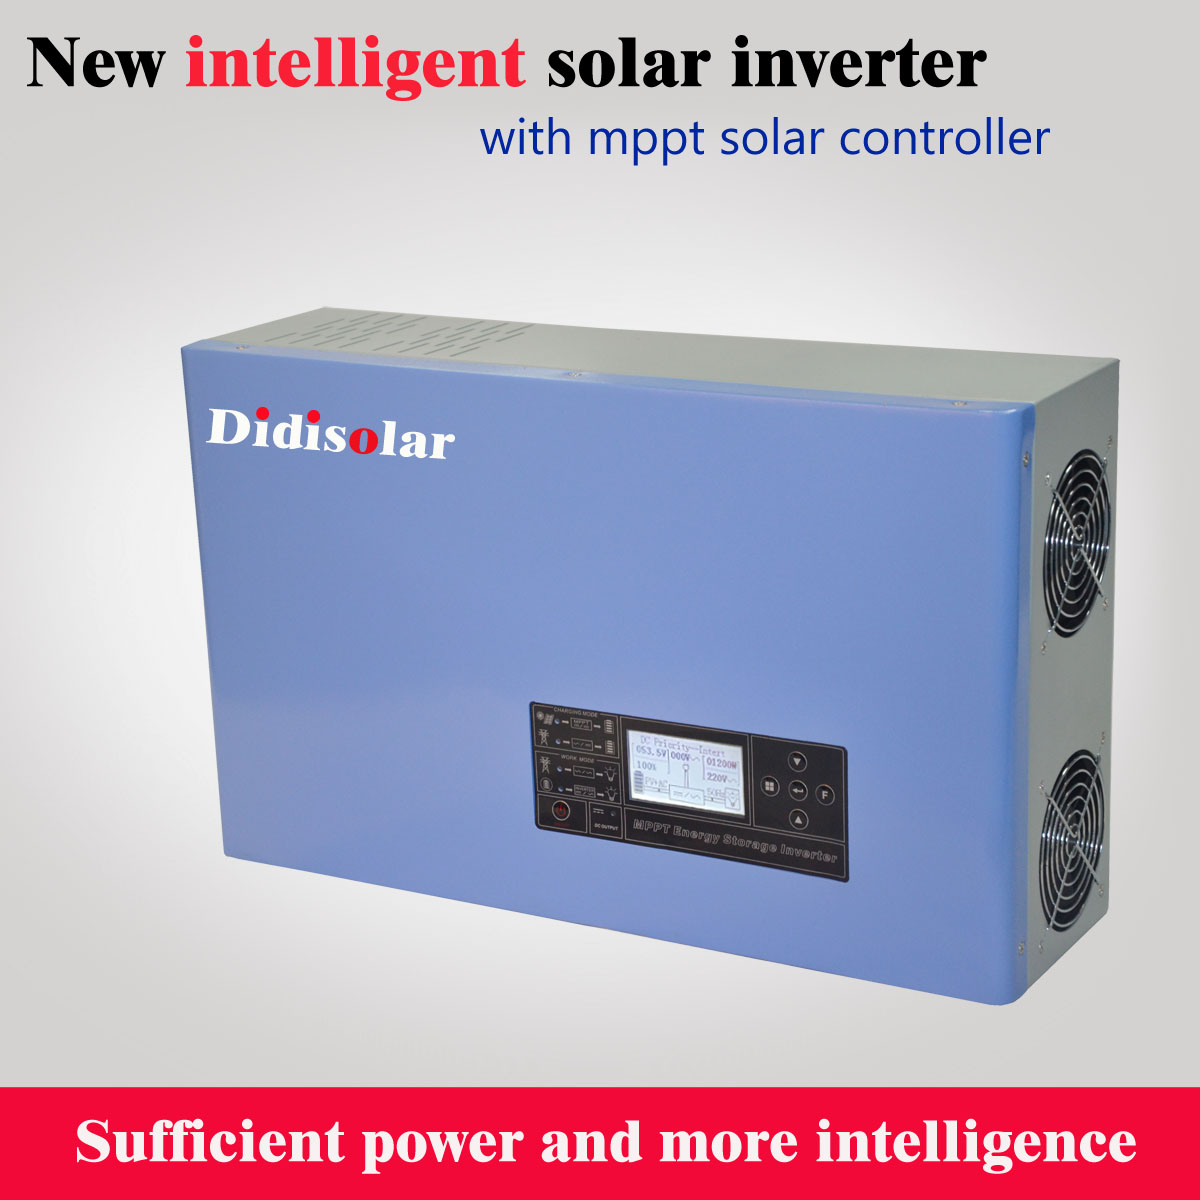 What information is displayed on the status page of Didisolar smart solar  storage inverter?